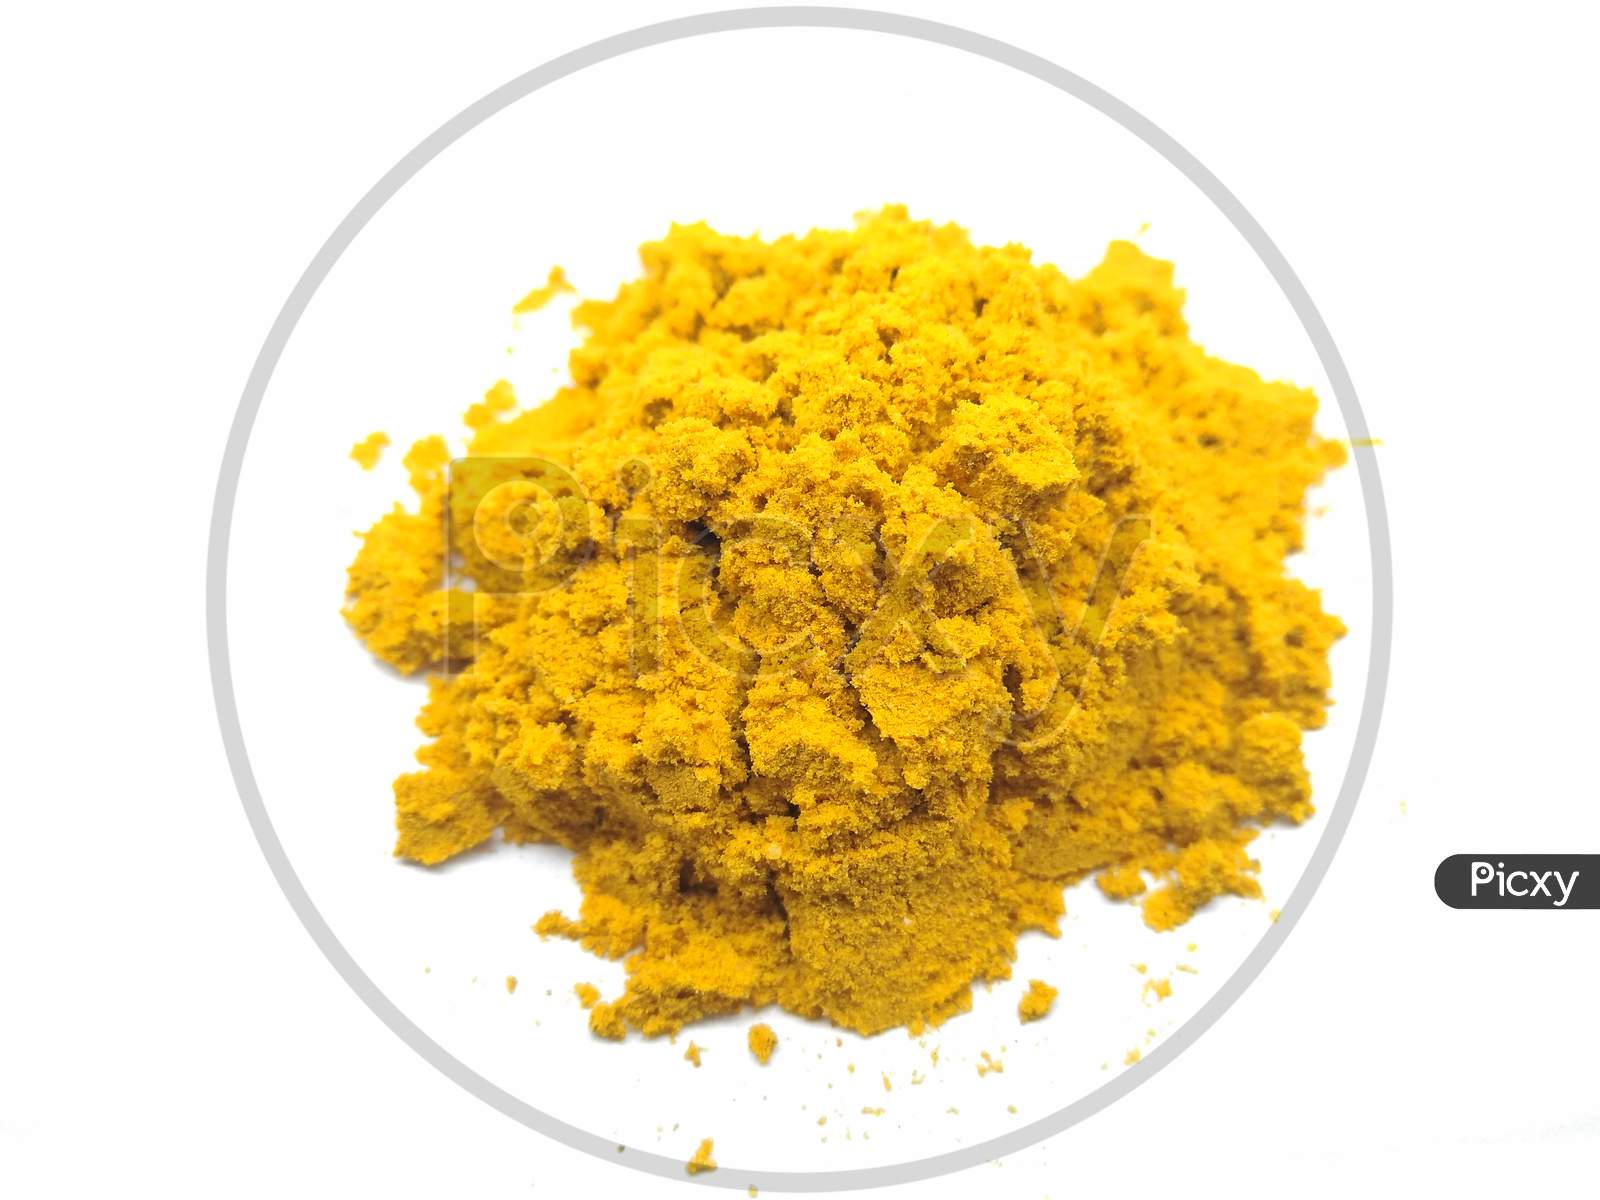 A picture of turmeric powder